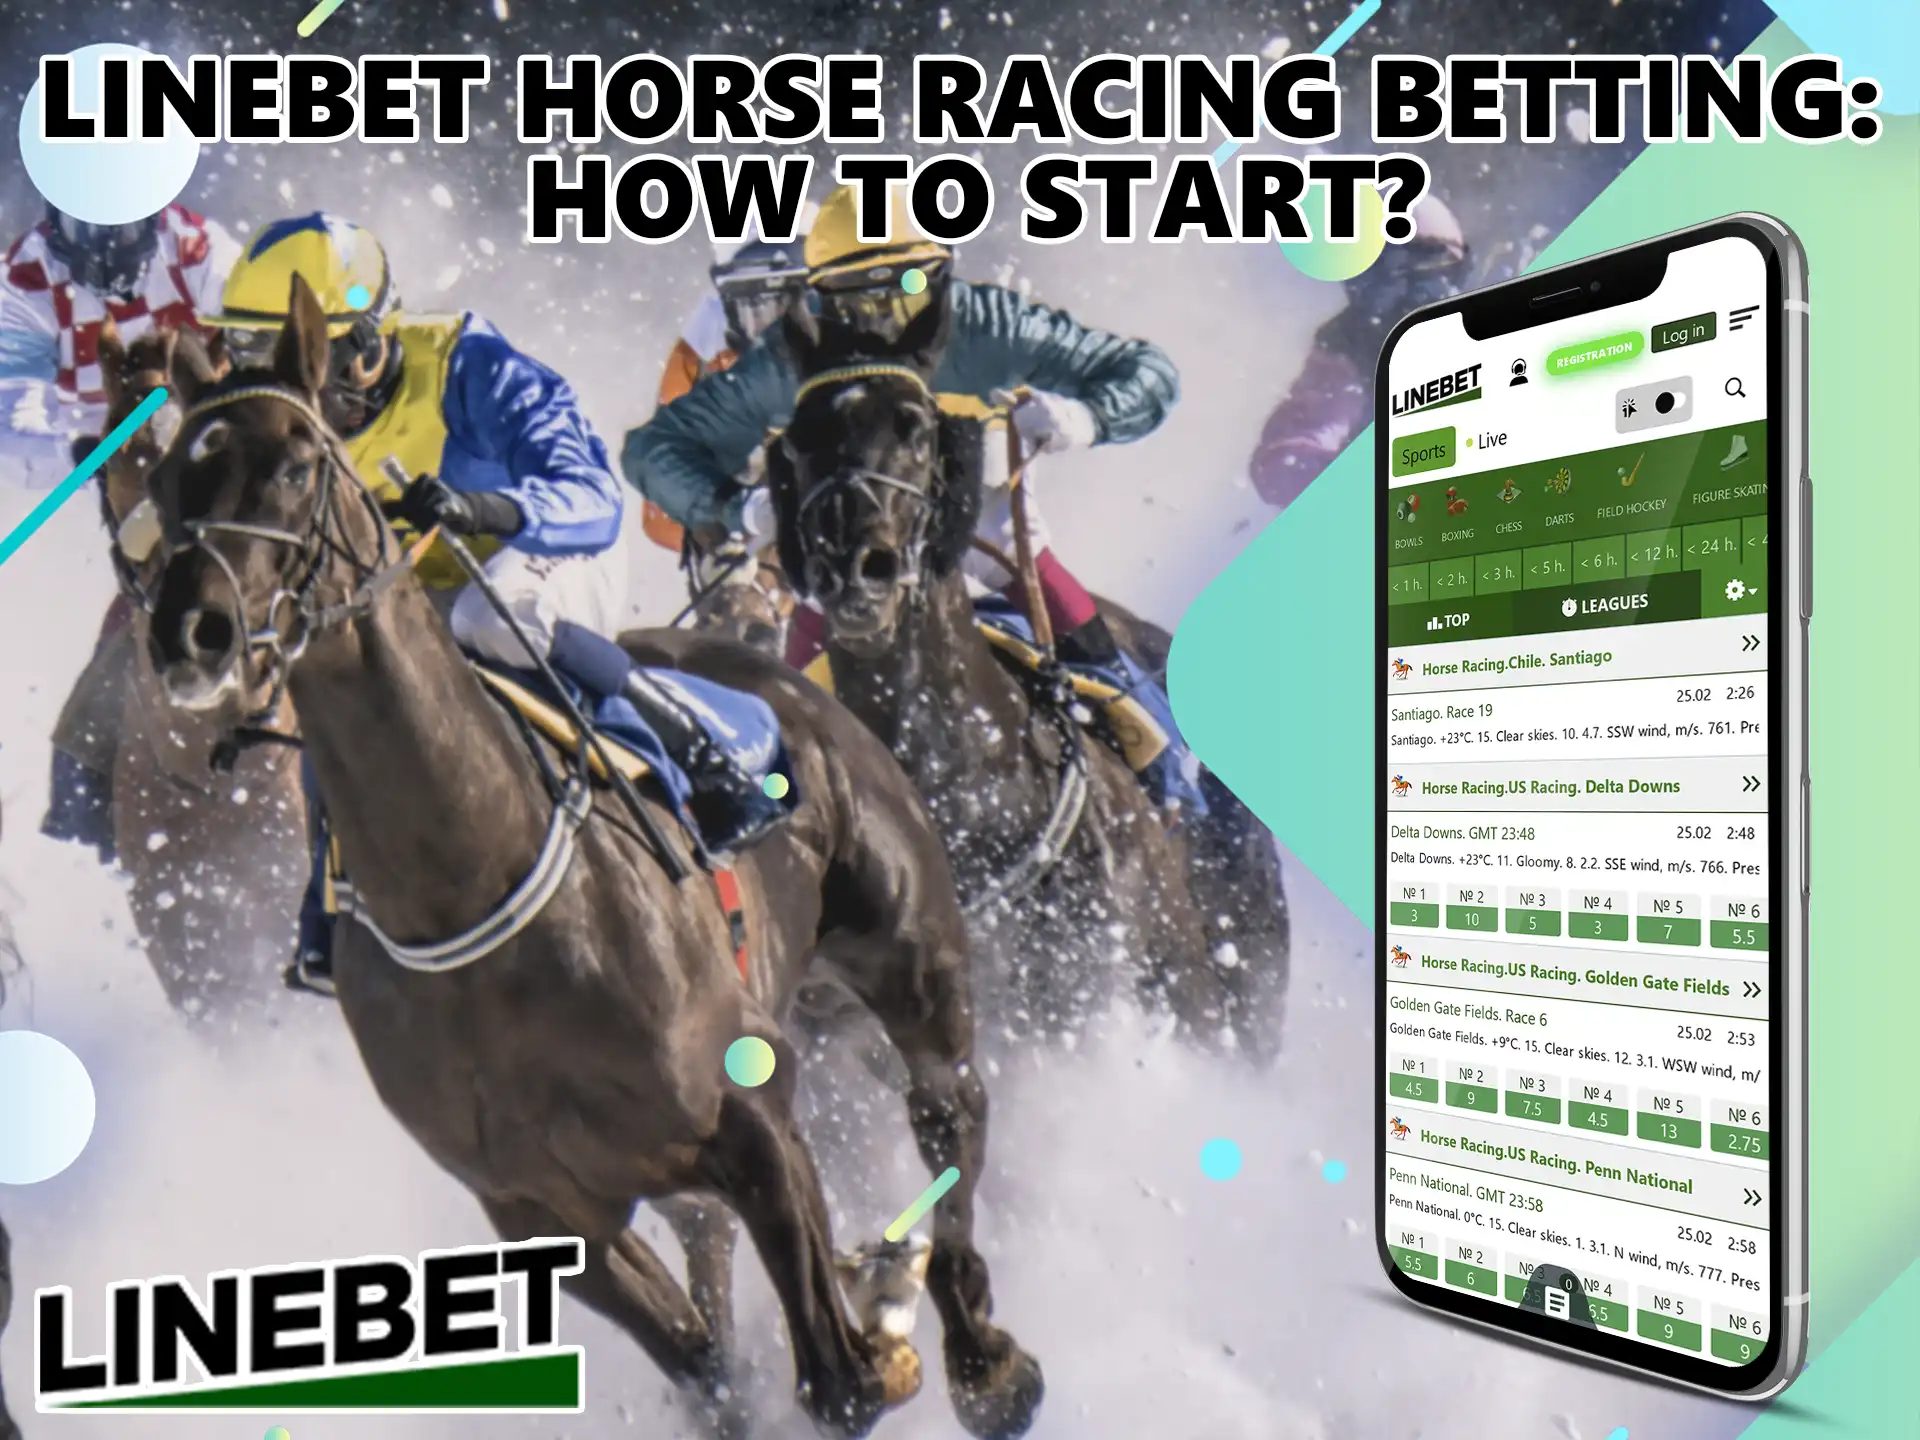 You can start enjoying betting on this interesting sport by creating an account with Linebet and funding money to your account.